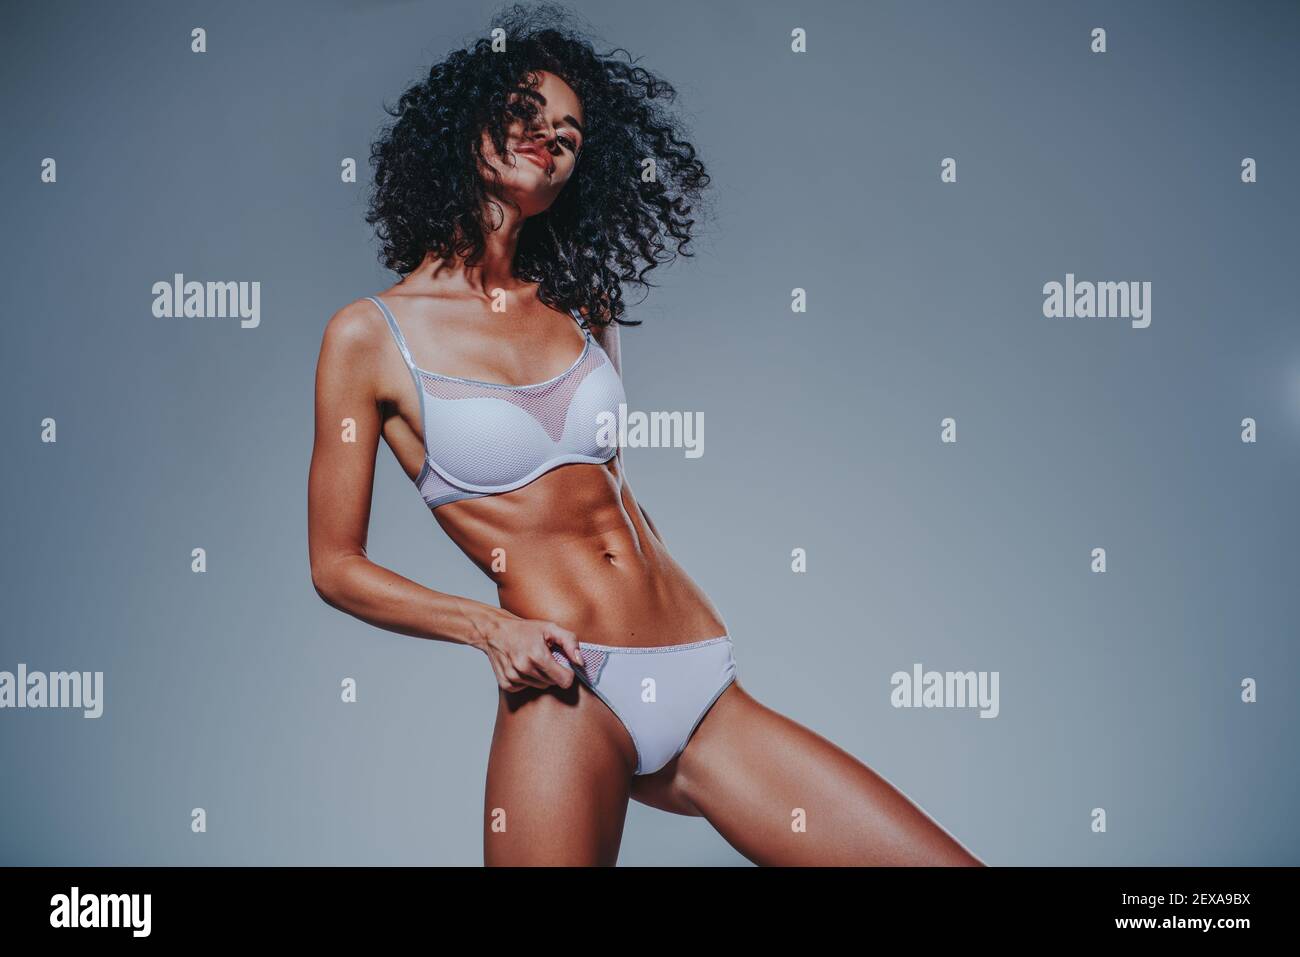 Young slim woman in sports lingerie on gray wall background Stock Photo